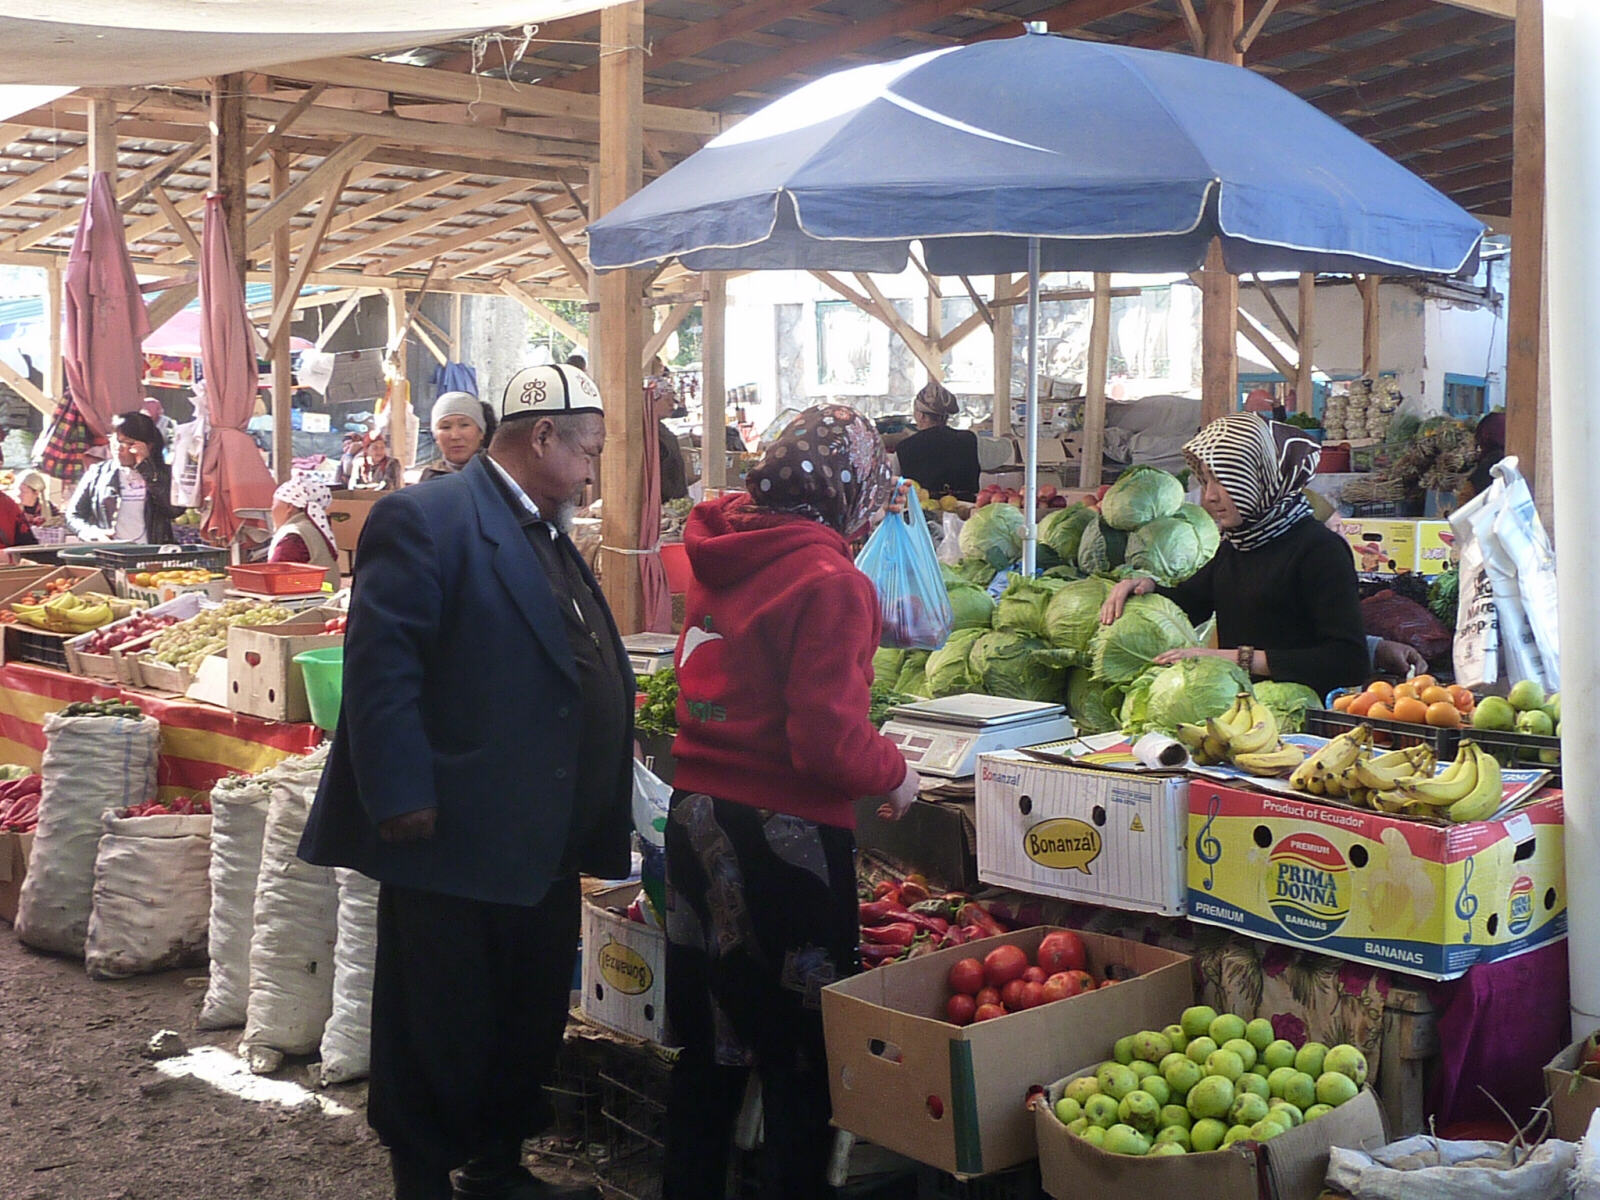 A vegetable stall in the market in Osh, Kyrgyzstan